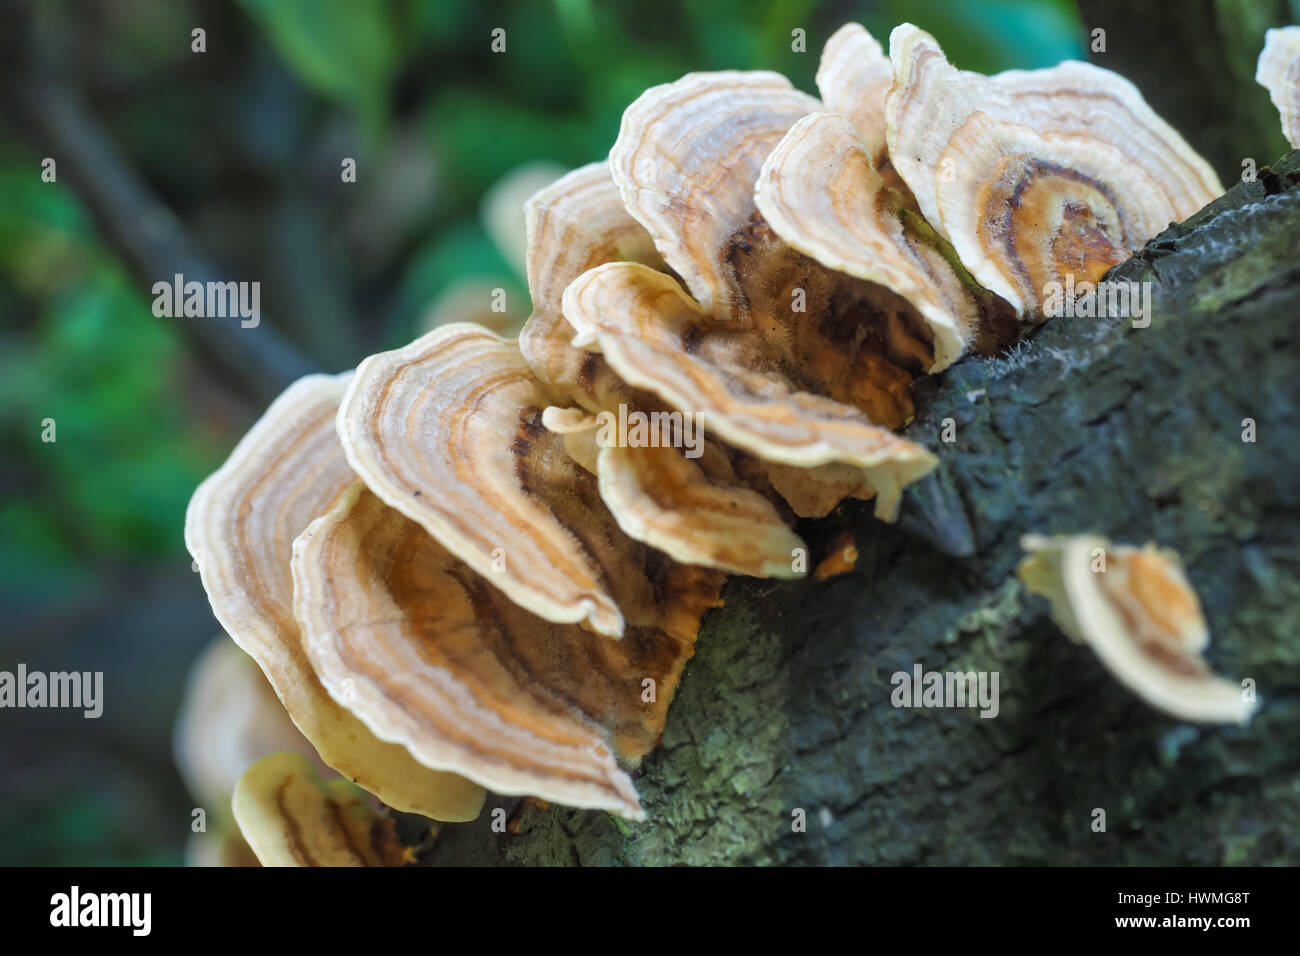 Bracket Fungus on a decaying tree branch, in close-up. Stock Photo